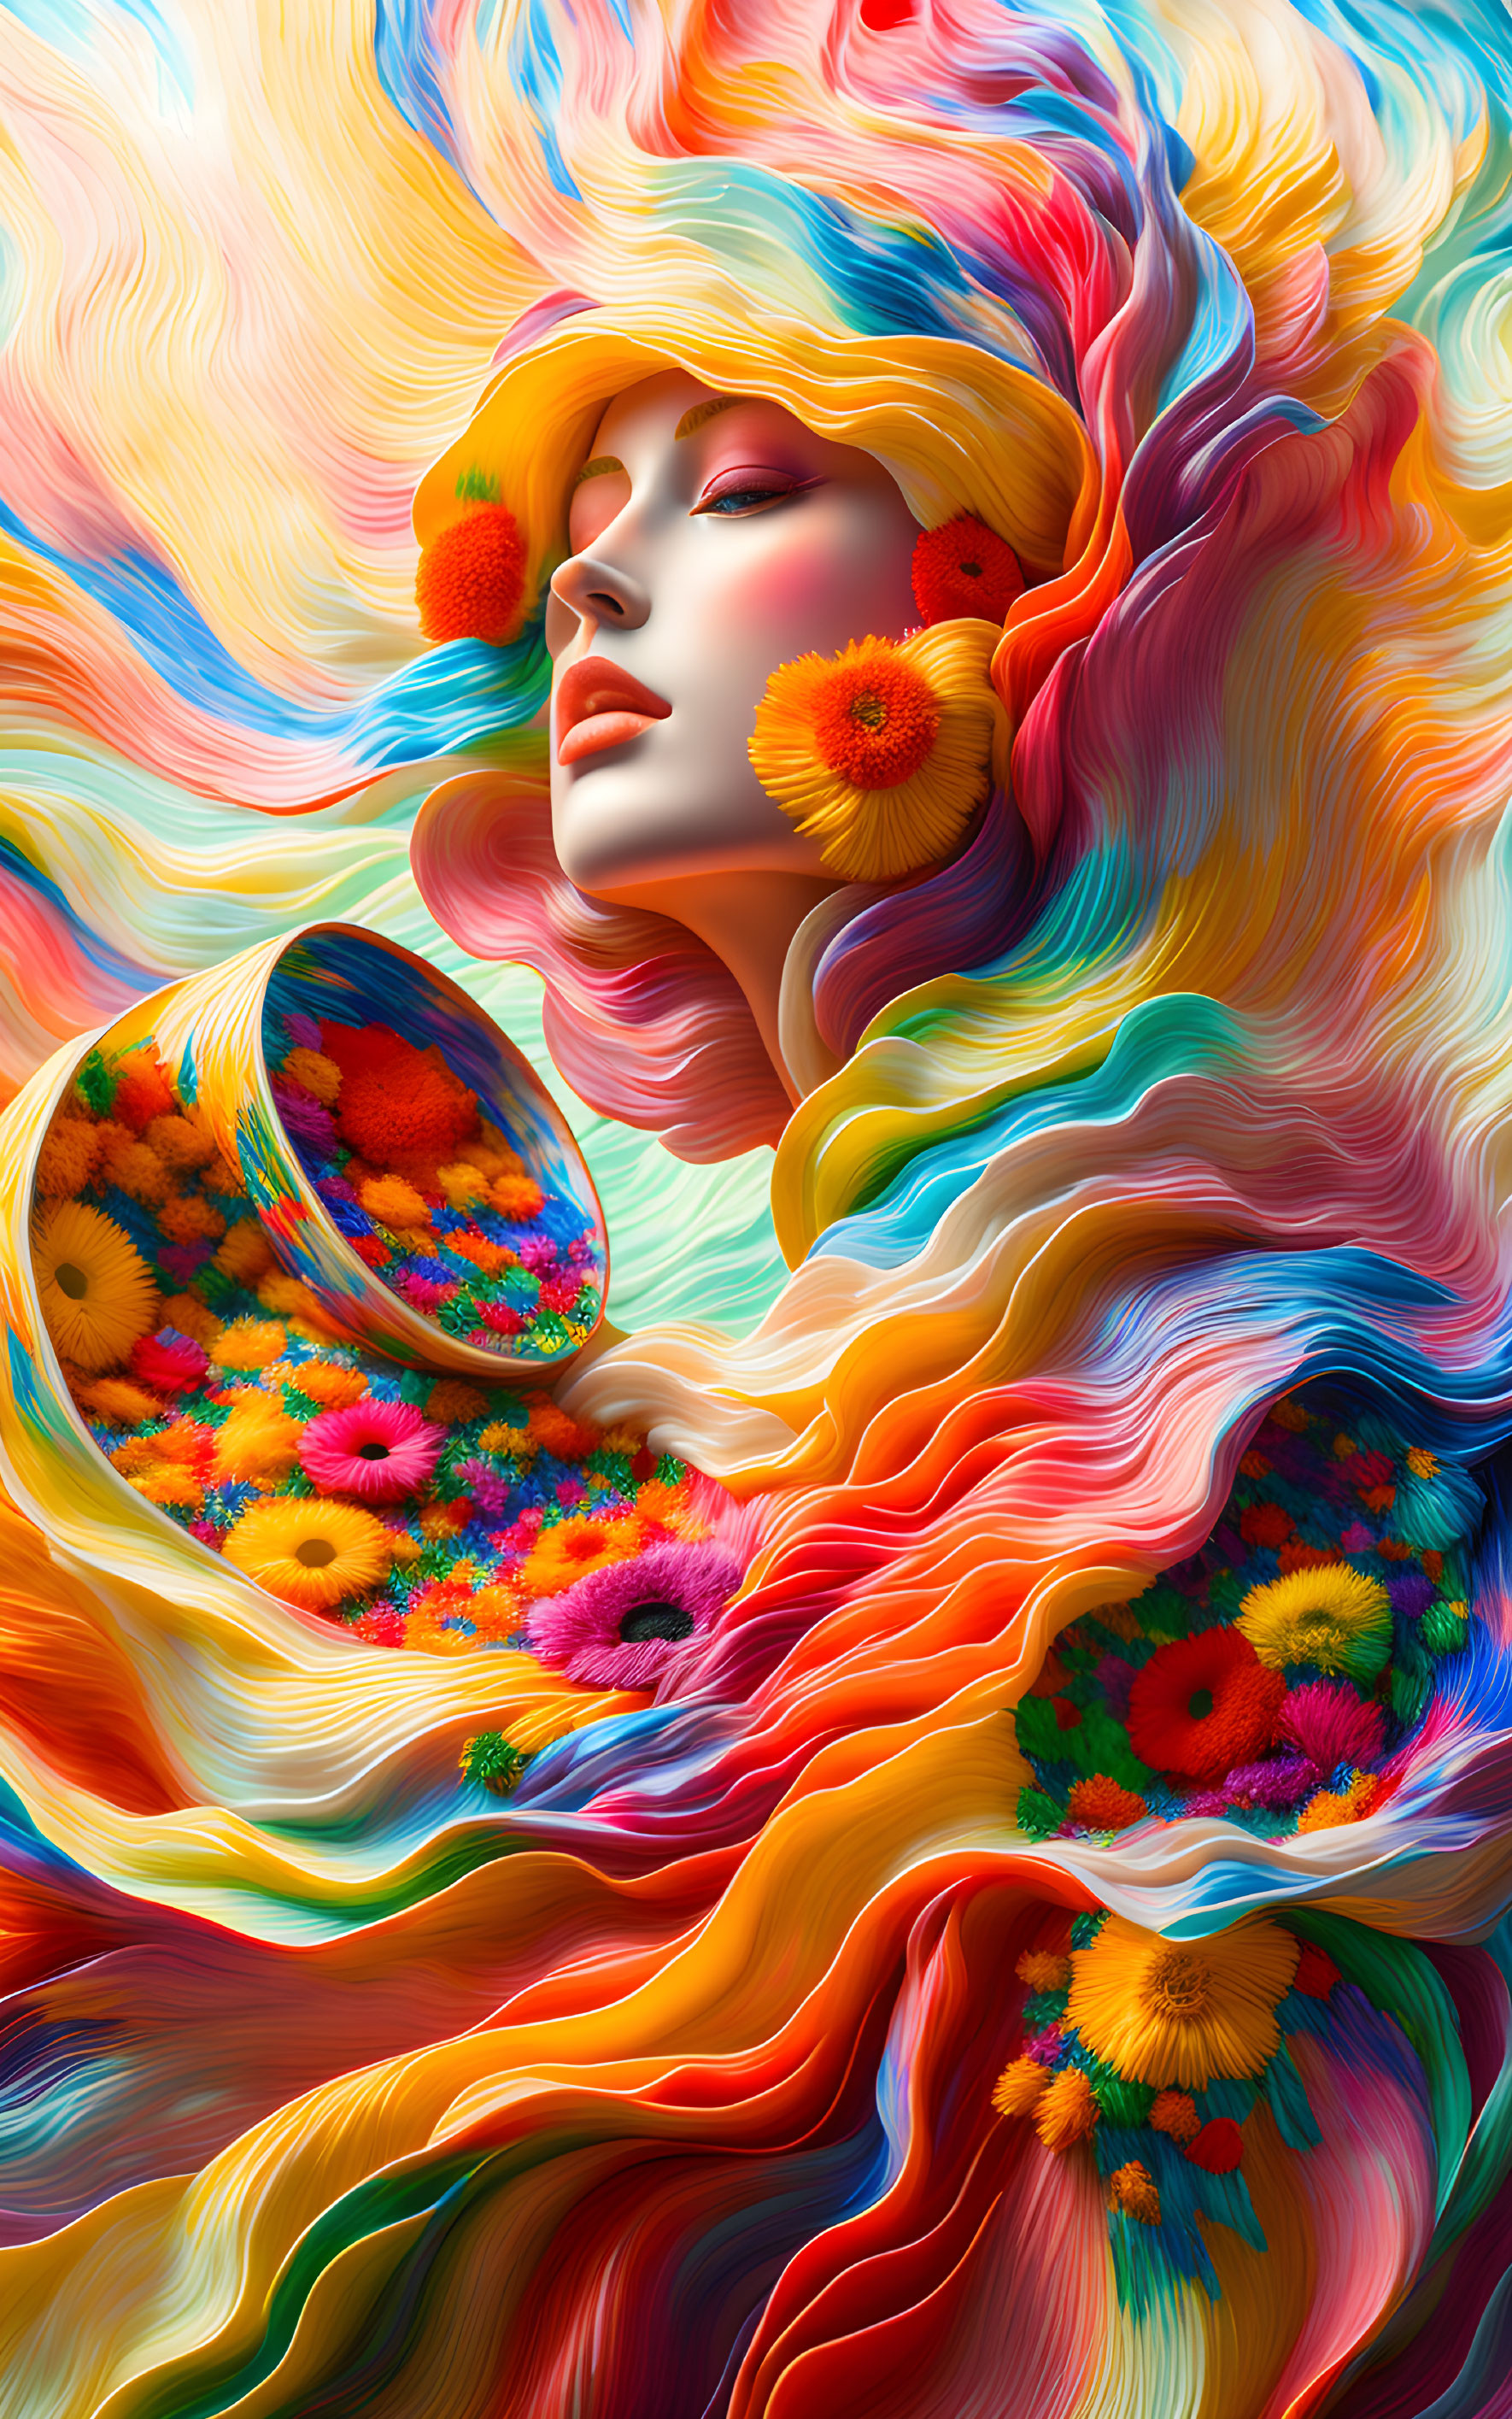 Colorful digital artwork: Stylized woman with vibrant hair and mirror reflecting flowers